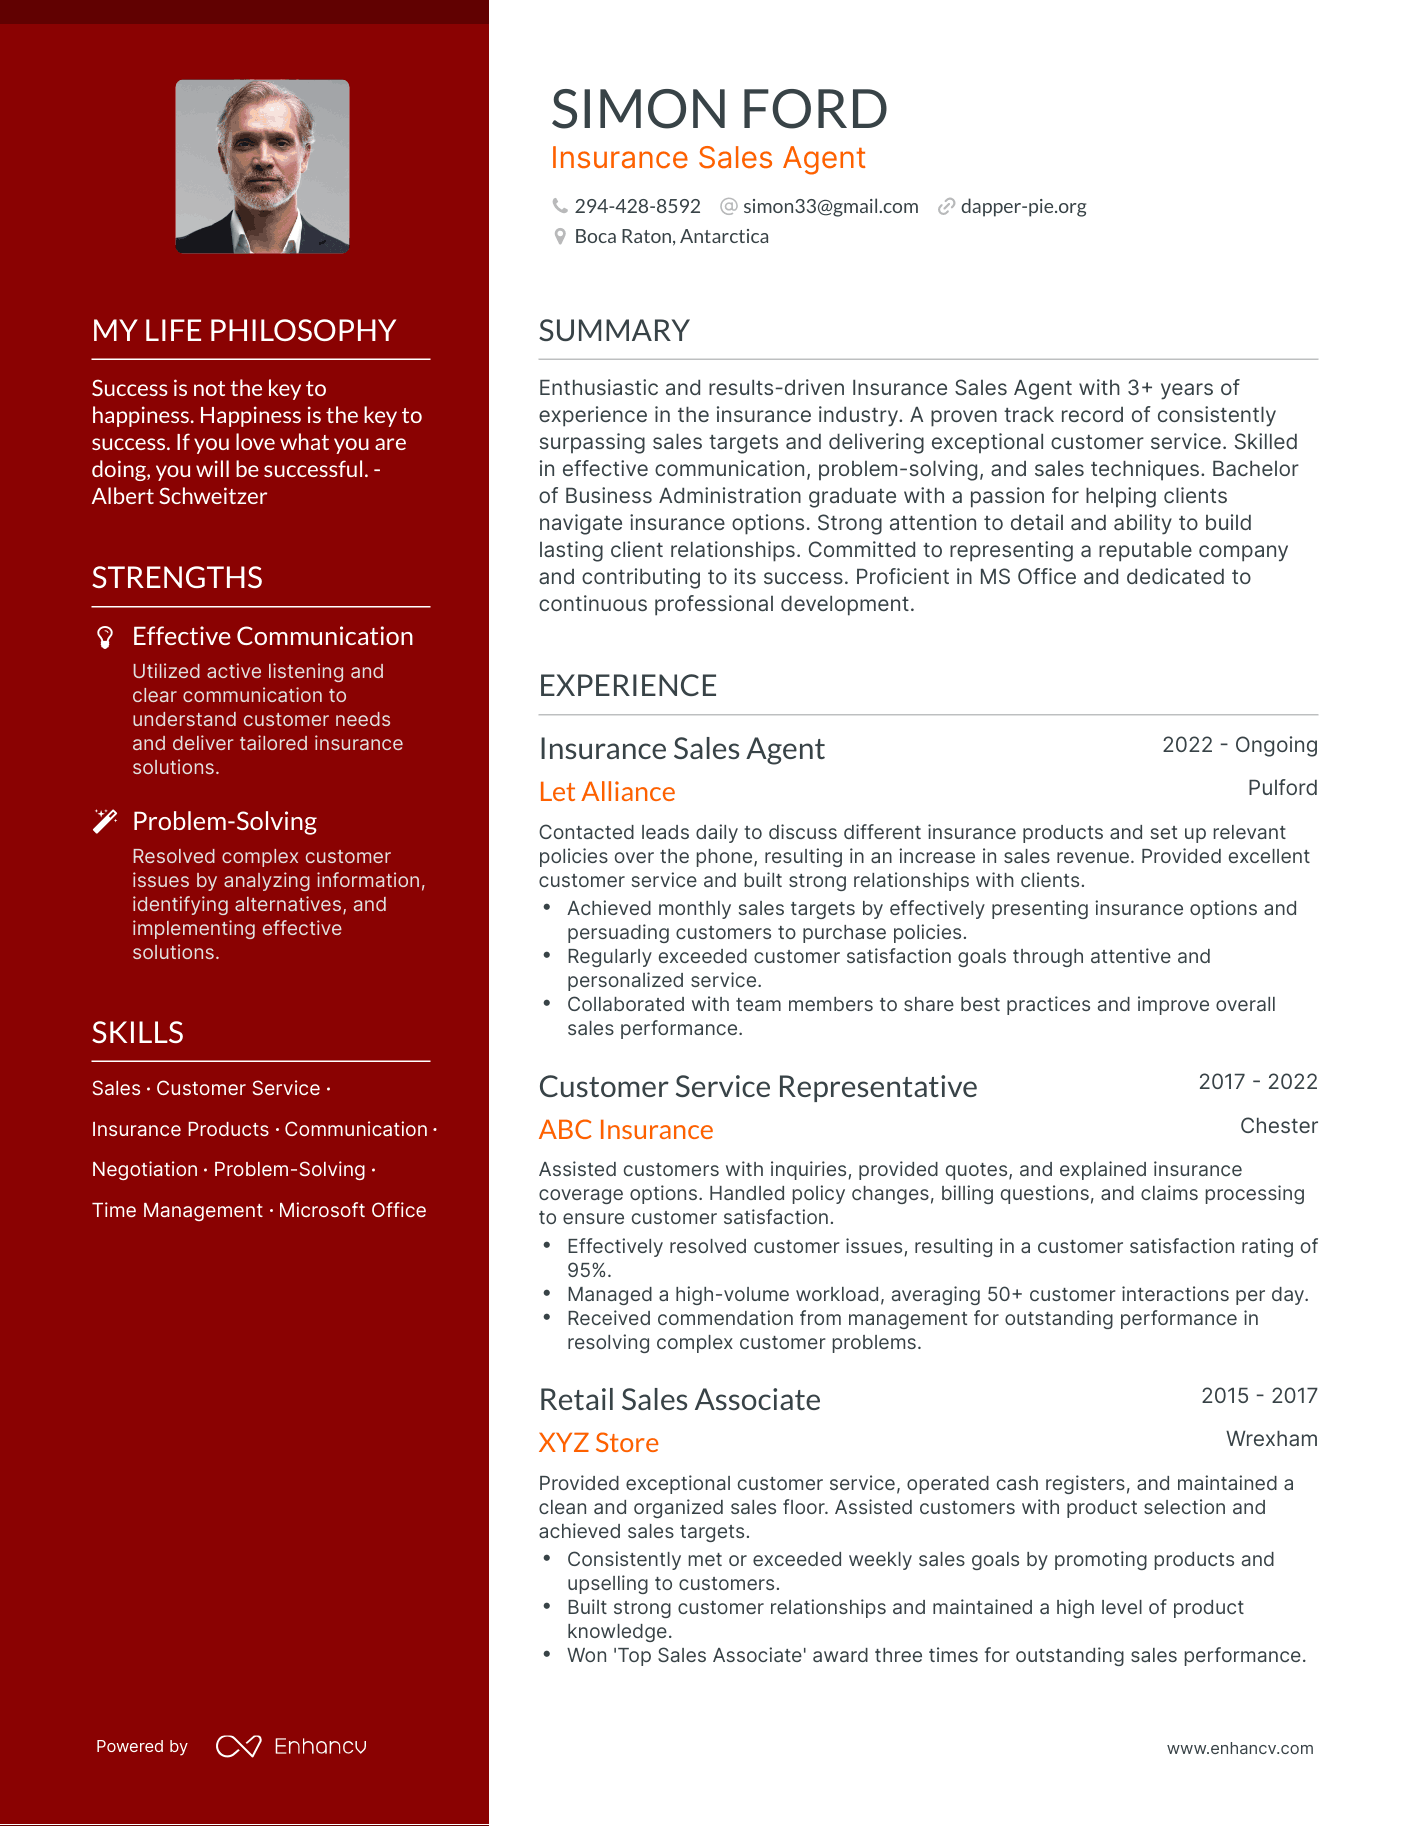 Insurance Sales Agent resume example